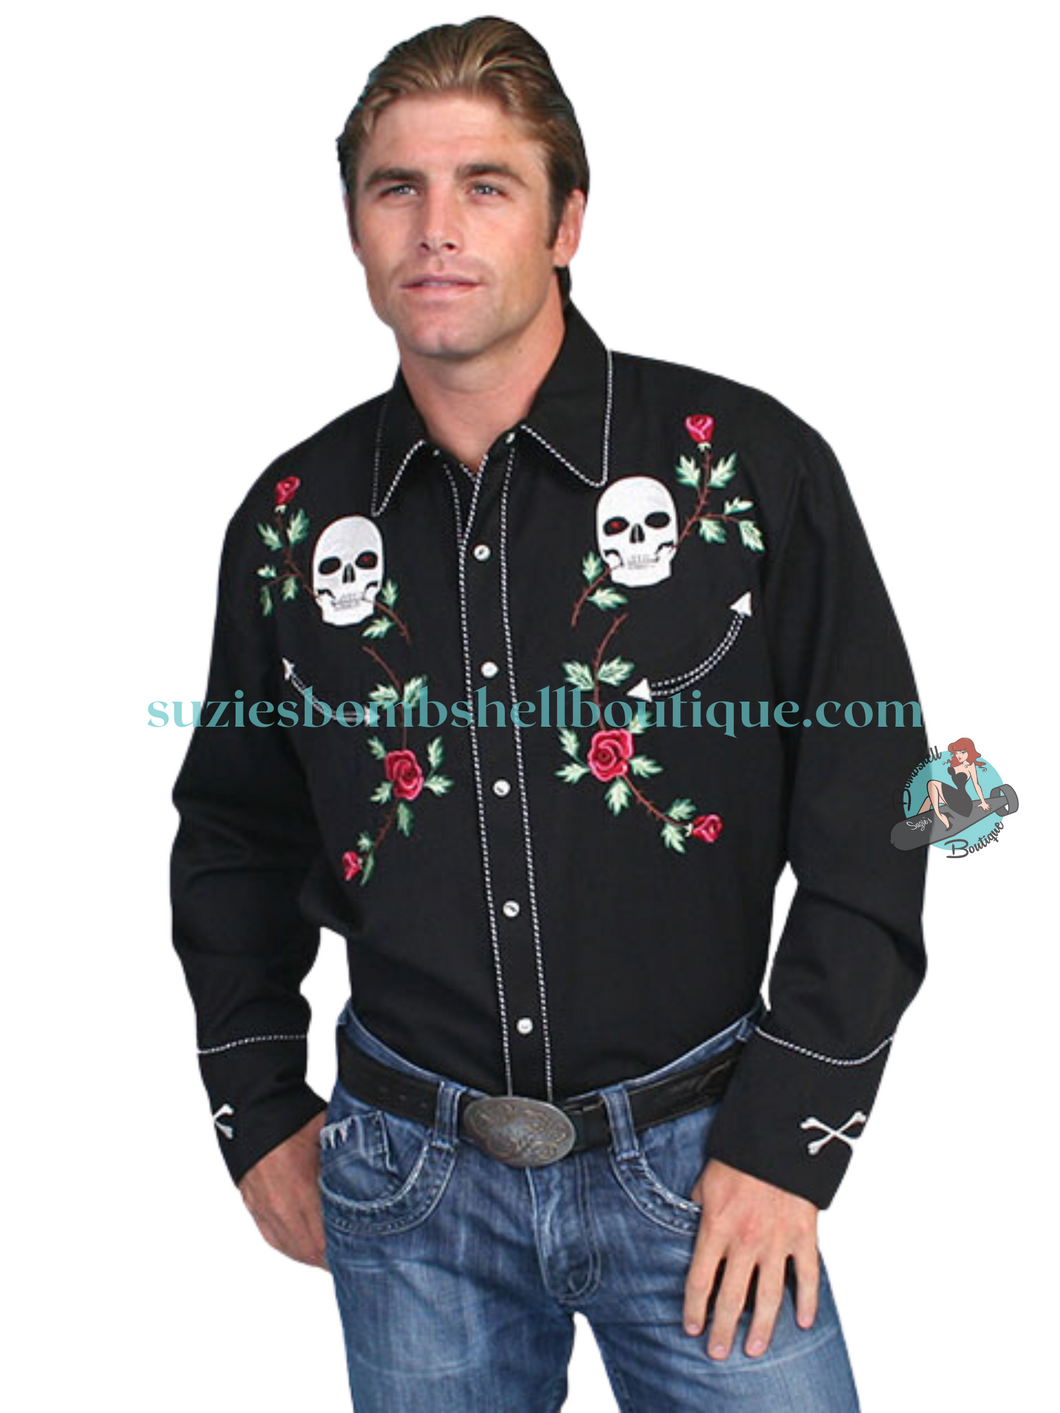 Scully Skull & Rose Embroidered Men's Shirt long sleeved black snap close shirt with white trim and goth skull and roses design skull and crossbones on cuffs with pearl snaps retro vintage rockabilly rock and roll western 1950s shirt for men Canadian Pin-Up Shop Suzie's Bombshell Boutique